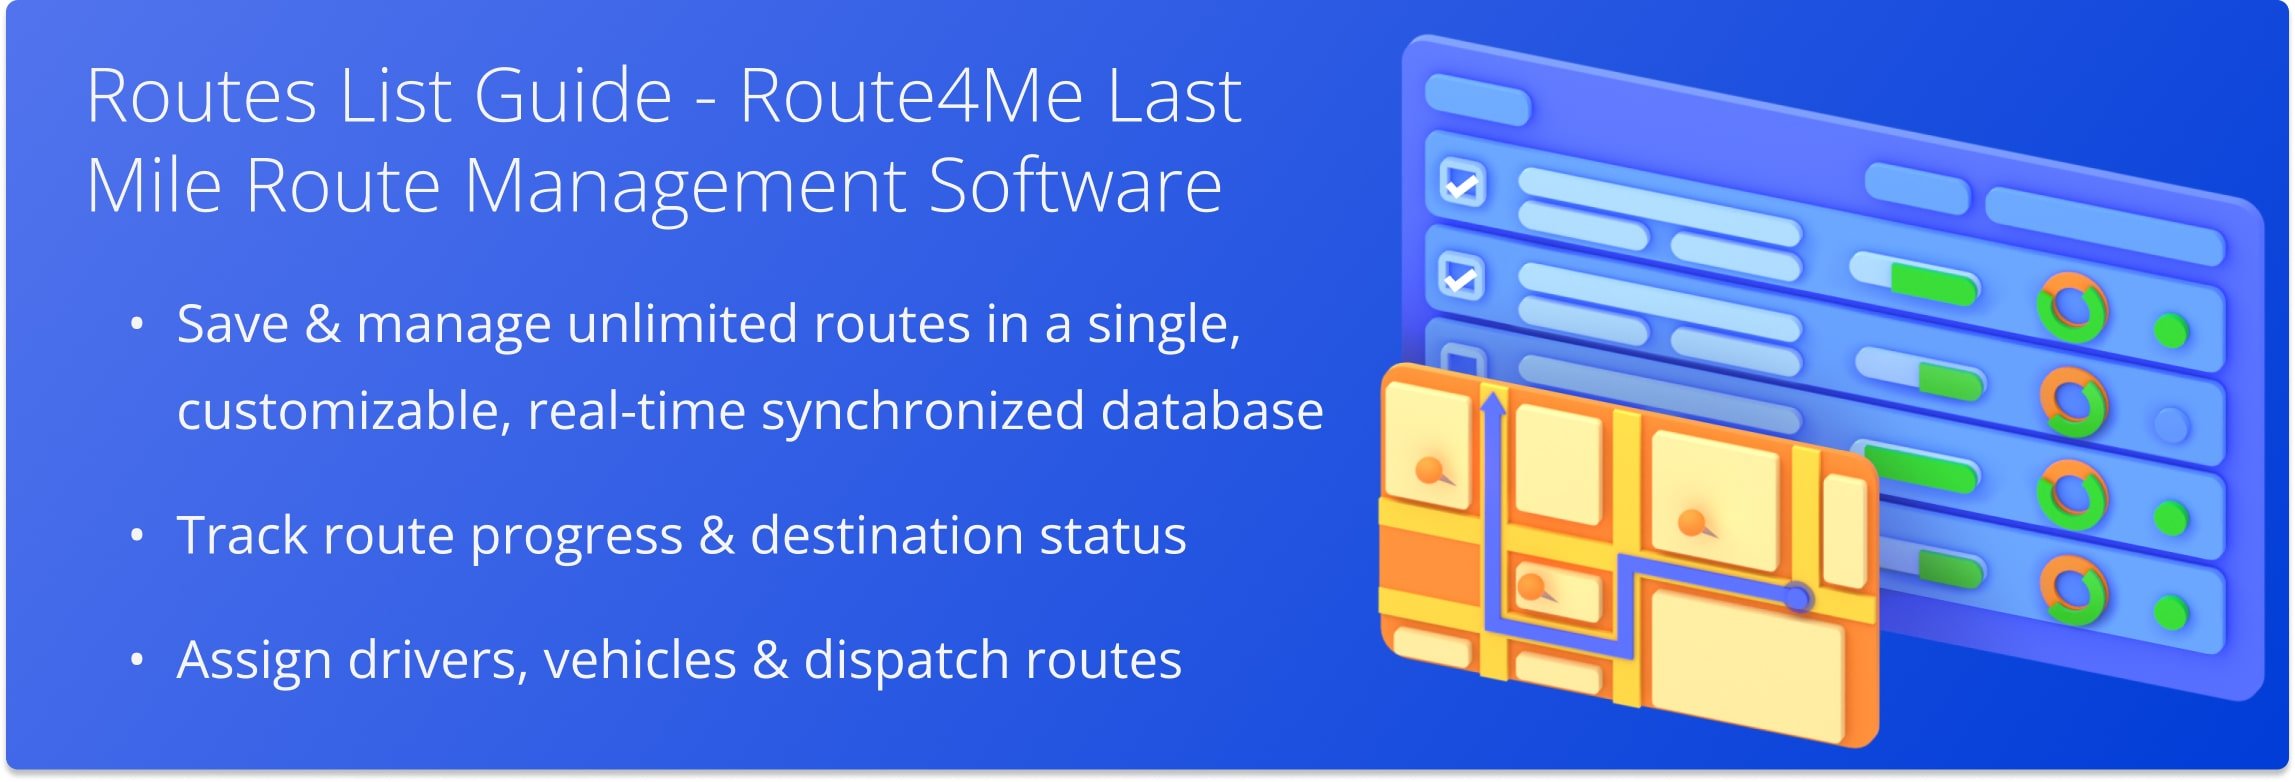 Using Route4Me's Route Planner Routes List for last mile route management and real-time multi-stop route progress tracking.